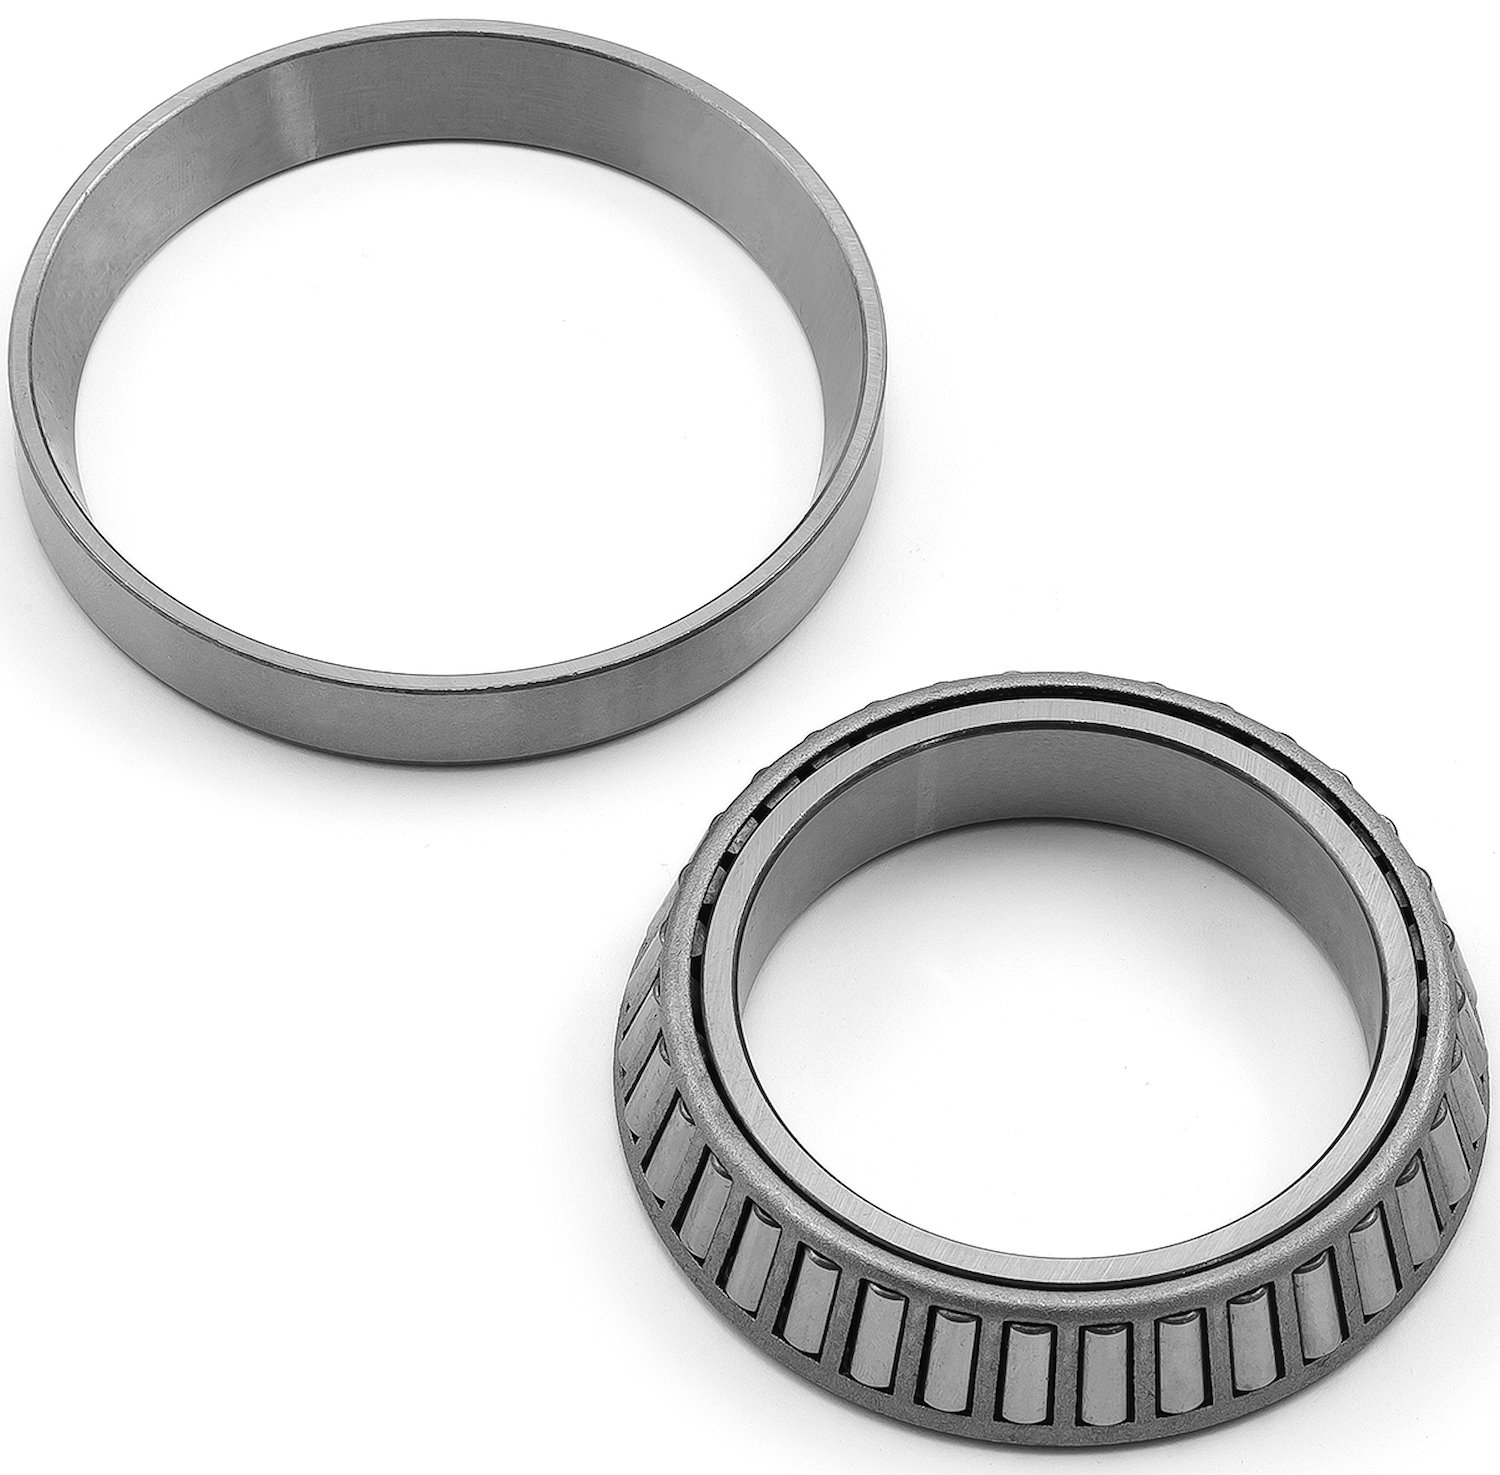 PCE by Speedmaster PCE203.1005 Fits Ford 9 Conversion Carrier Bearing to suit 35 Spline into 3.062 Case 